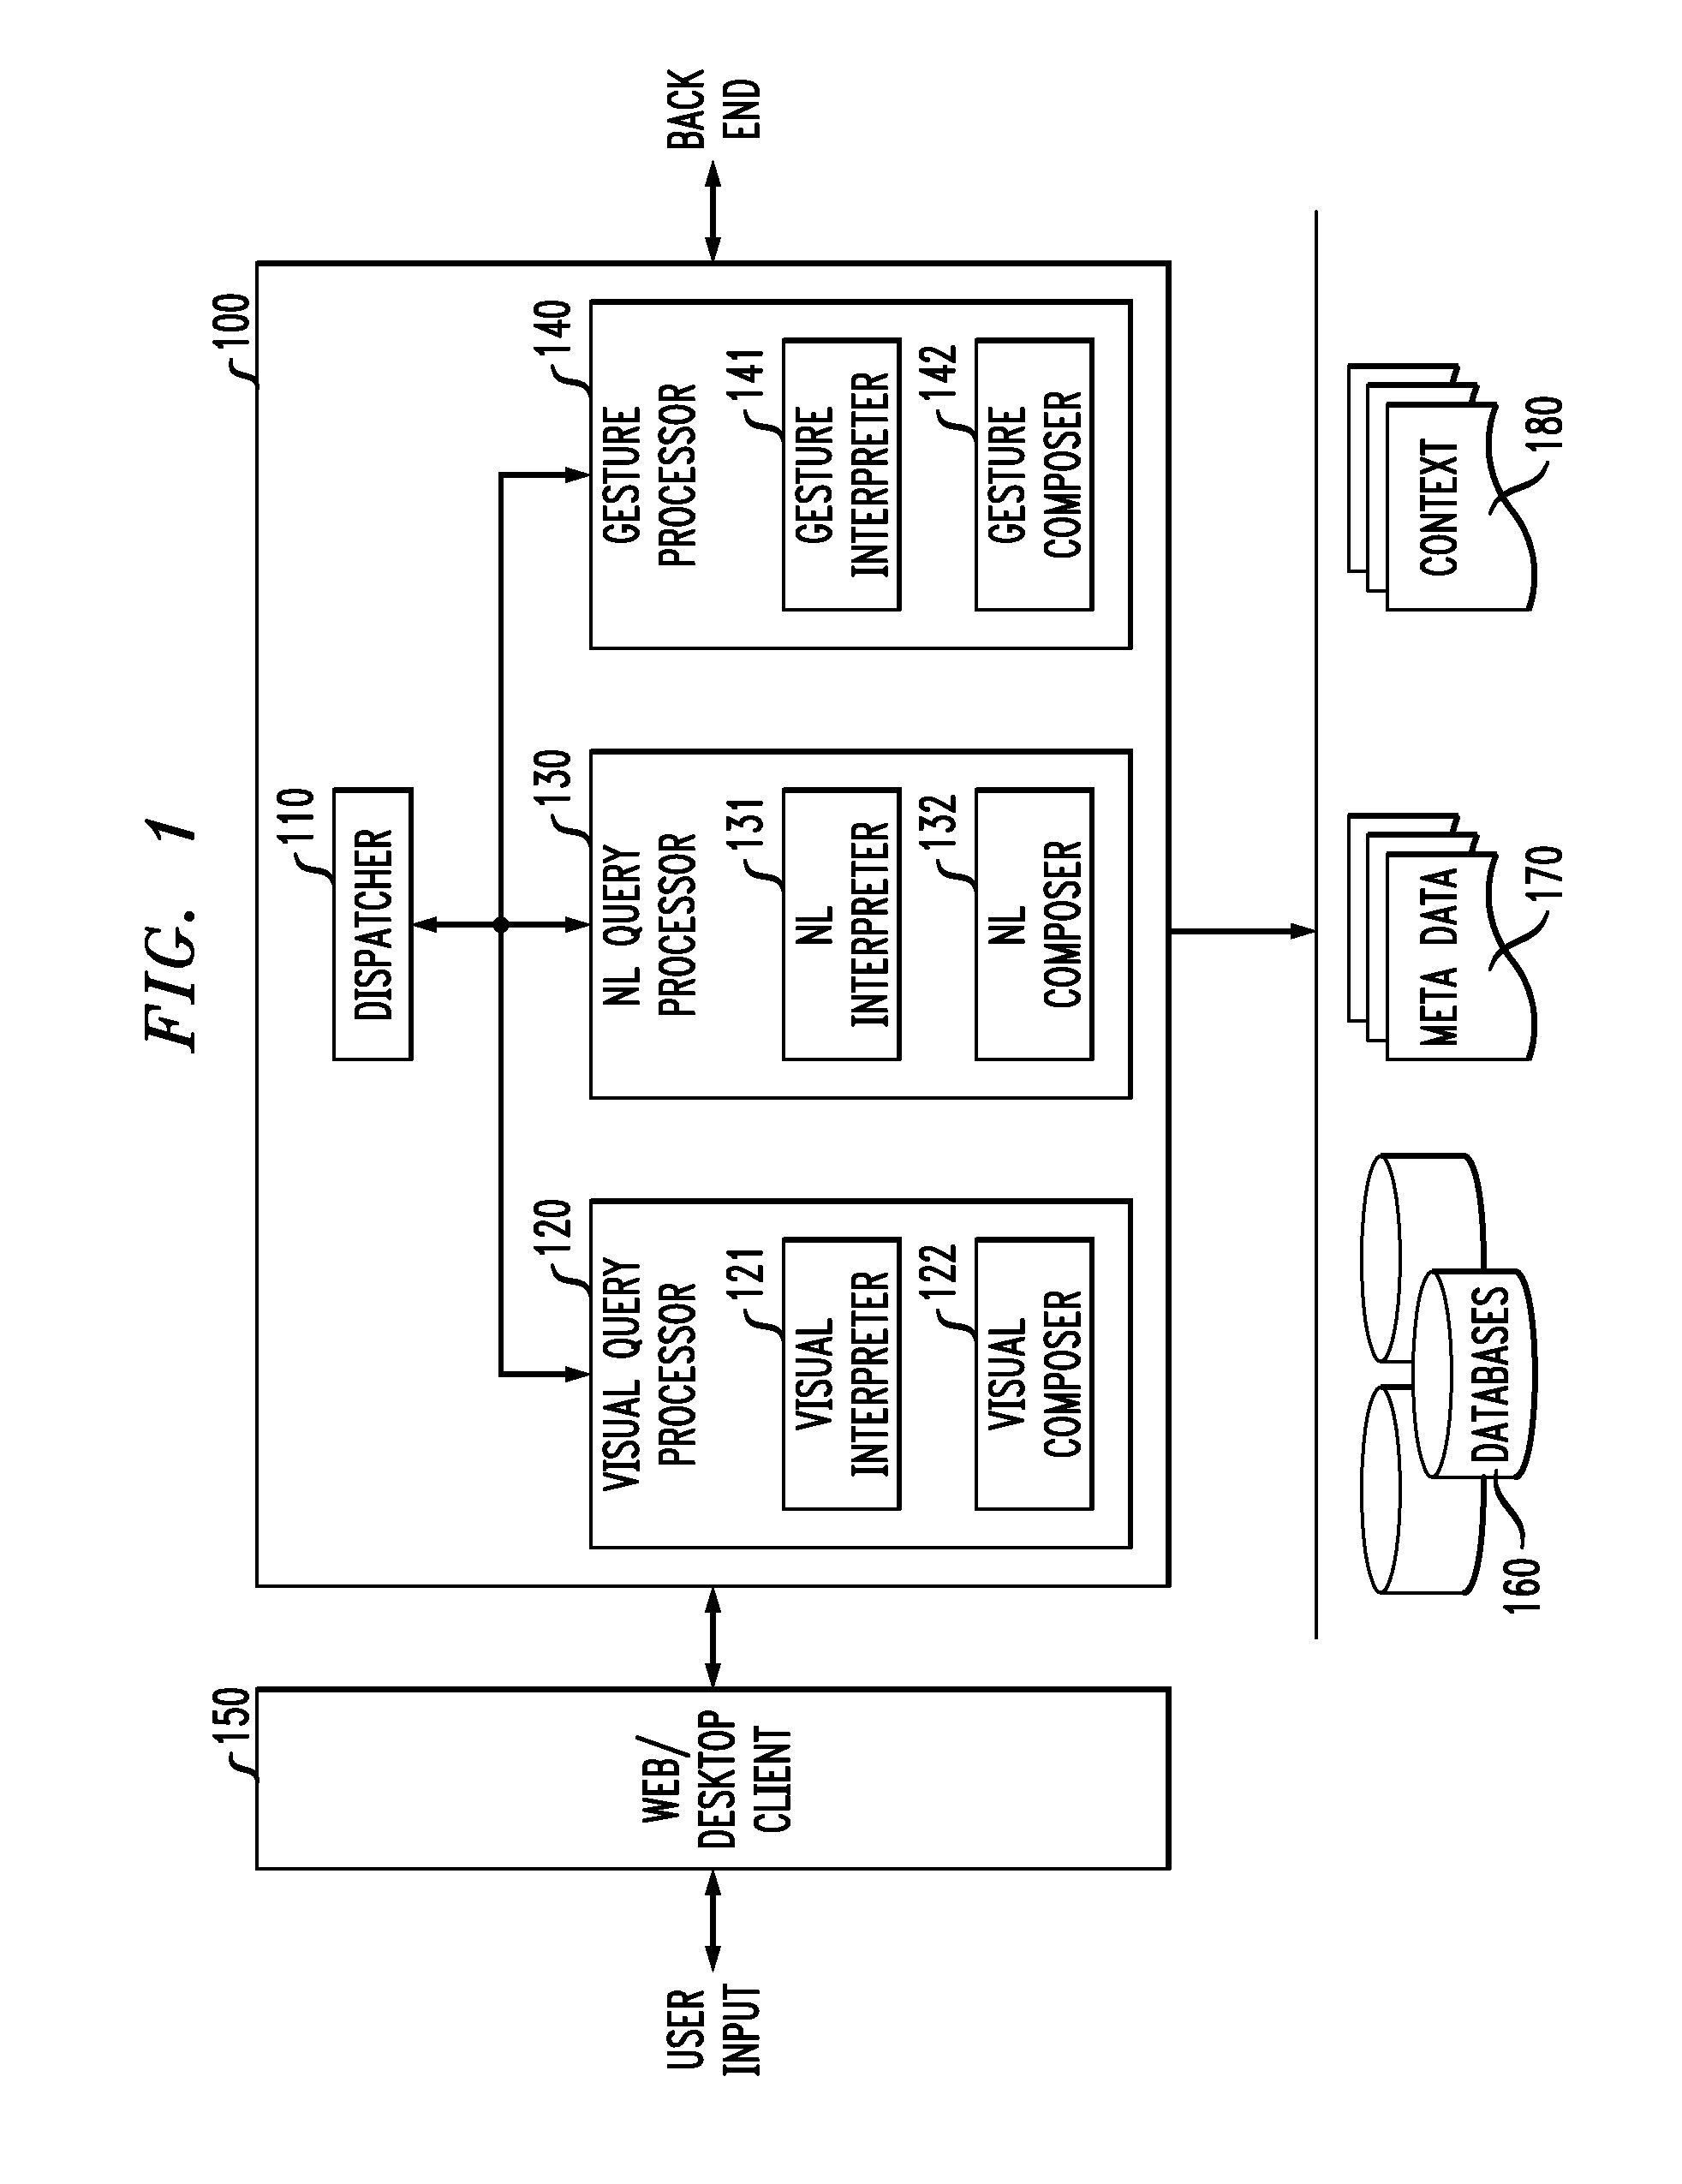 Methods and apparatus for integration of visual and natural language query interfaces for context-sensitive data exploration